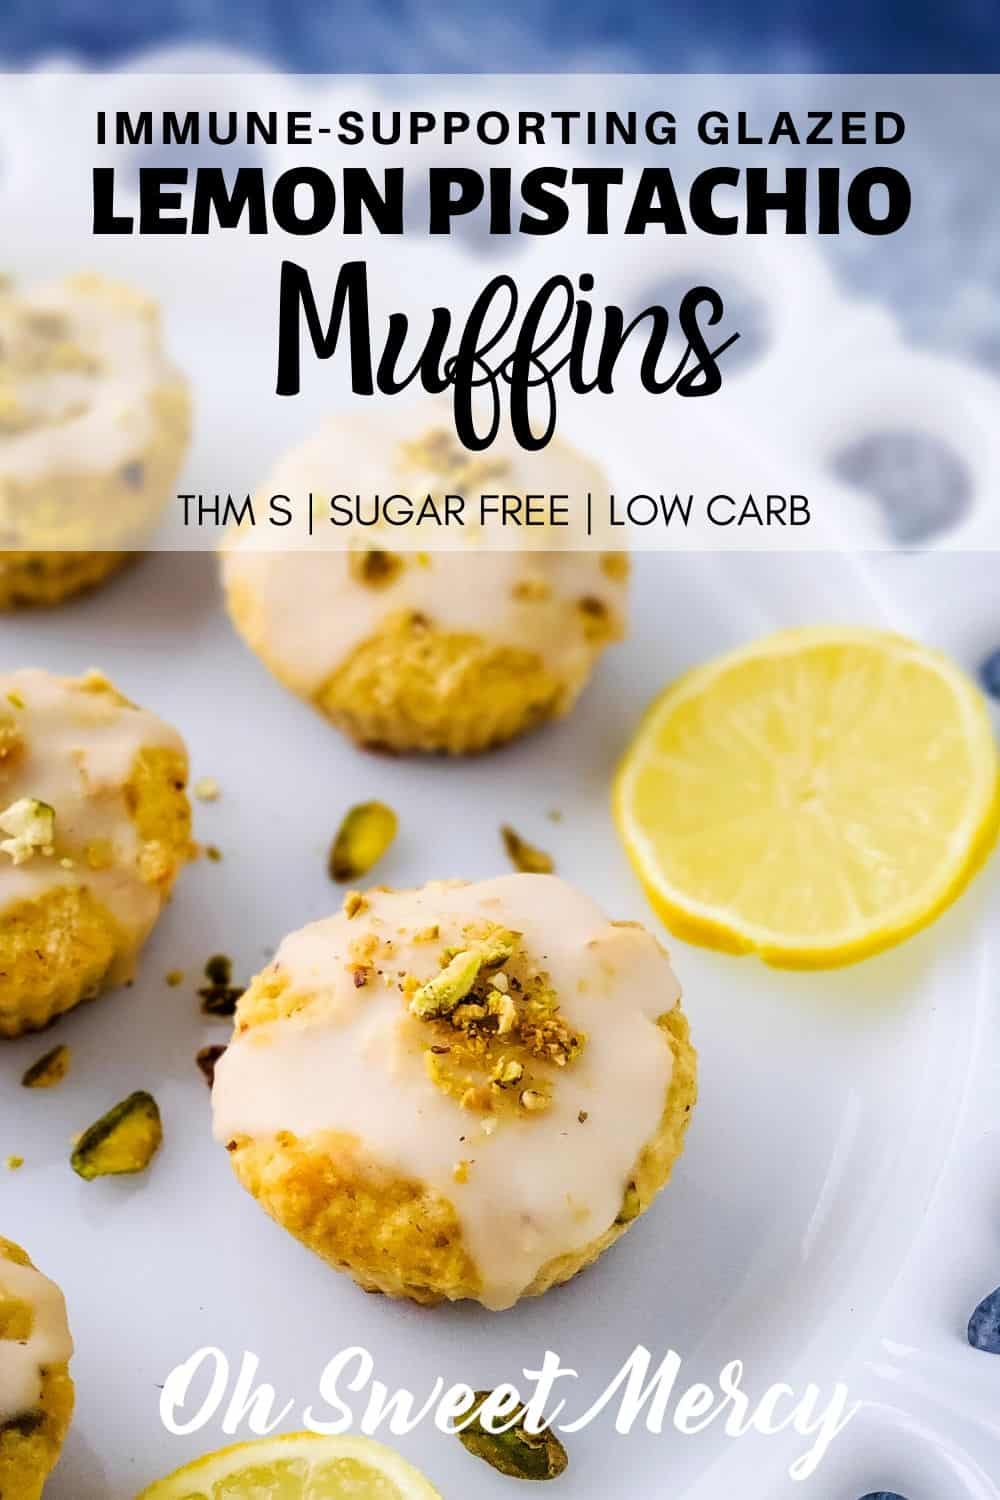 Easy, low carb Glazed Lemon Pistachio Muffins are a tasty way to support your immune system. No sugar or refined carbs plus immune supporting ingredients. THM S. #thm #lemon #muffins #lowcarb #keto #glutenfree